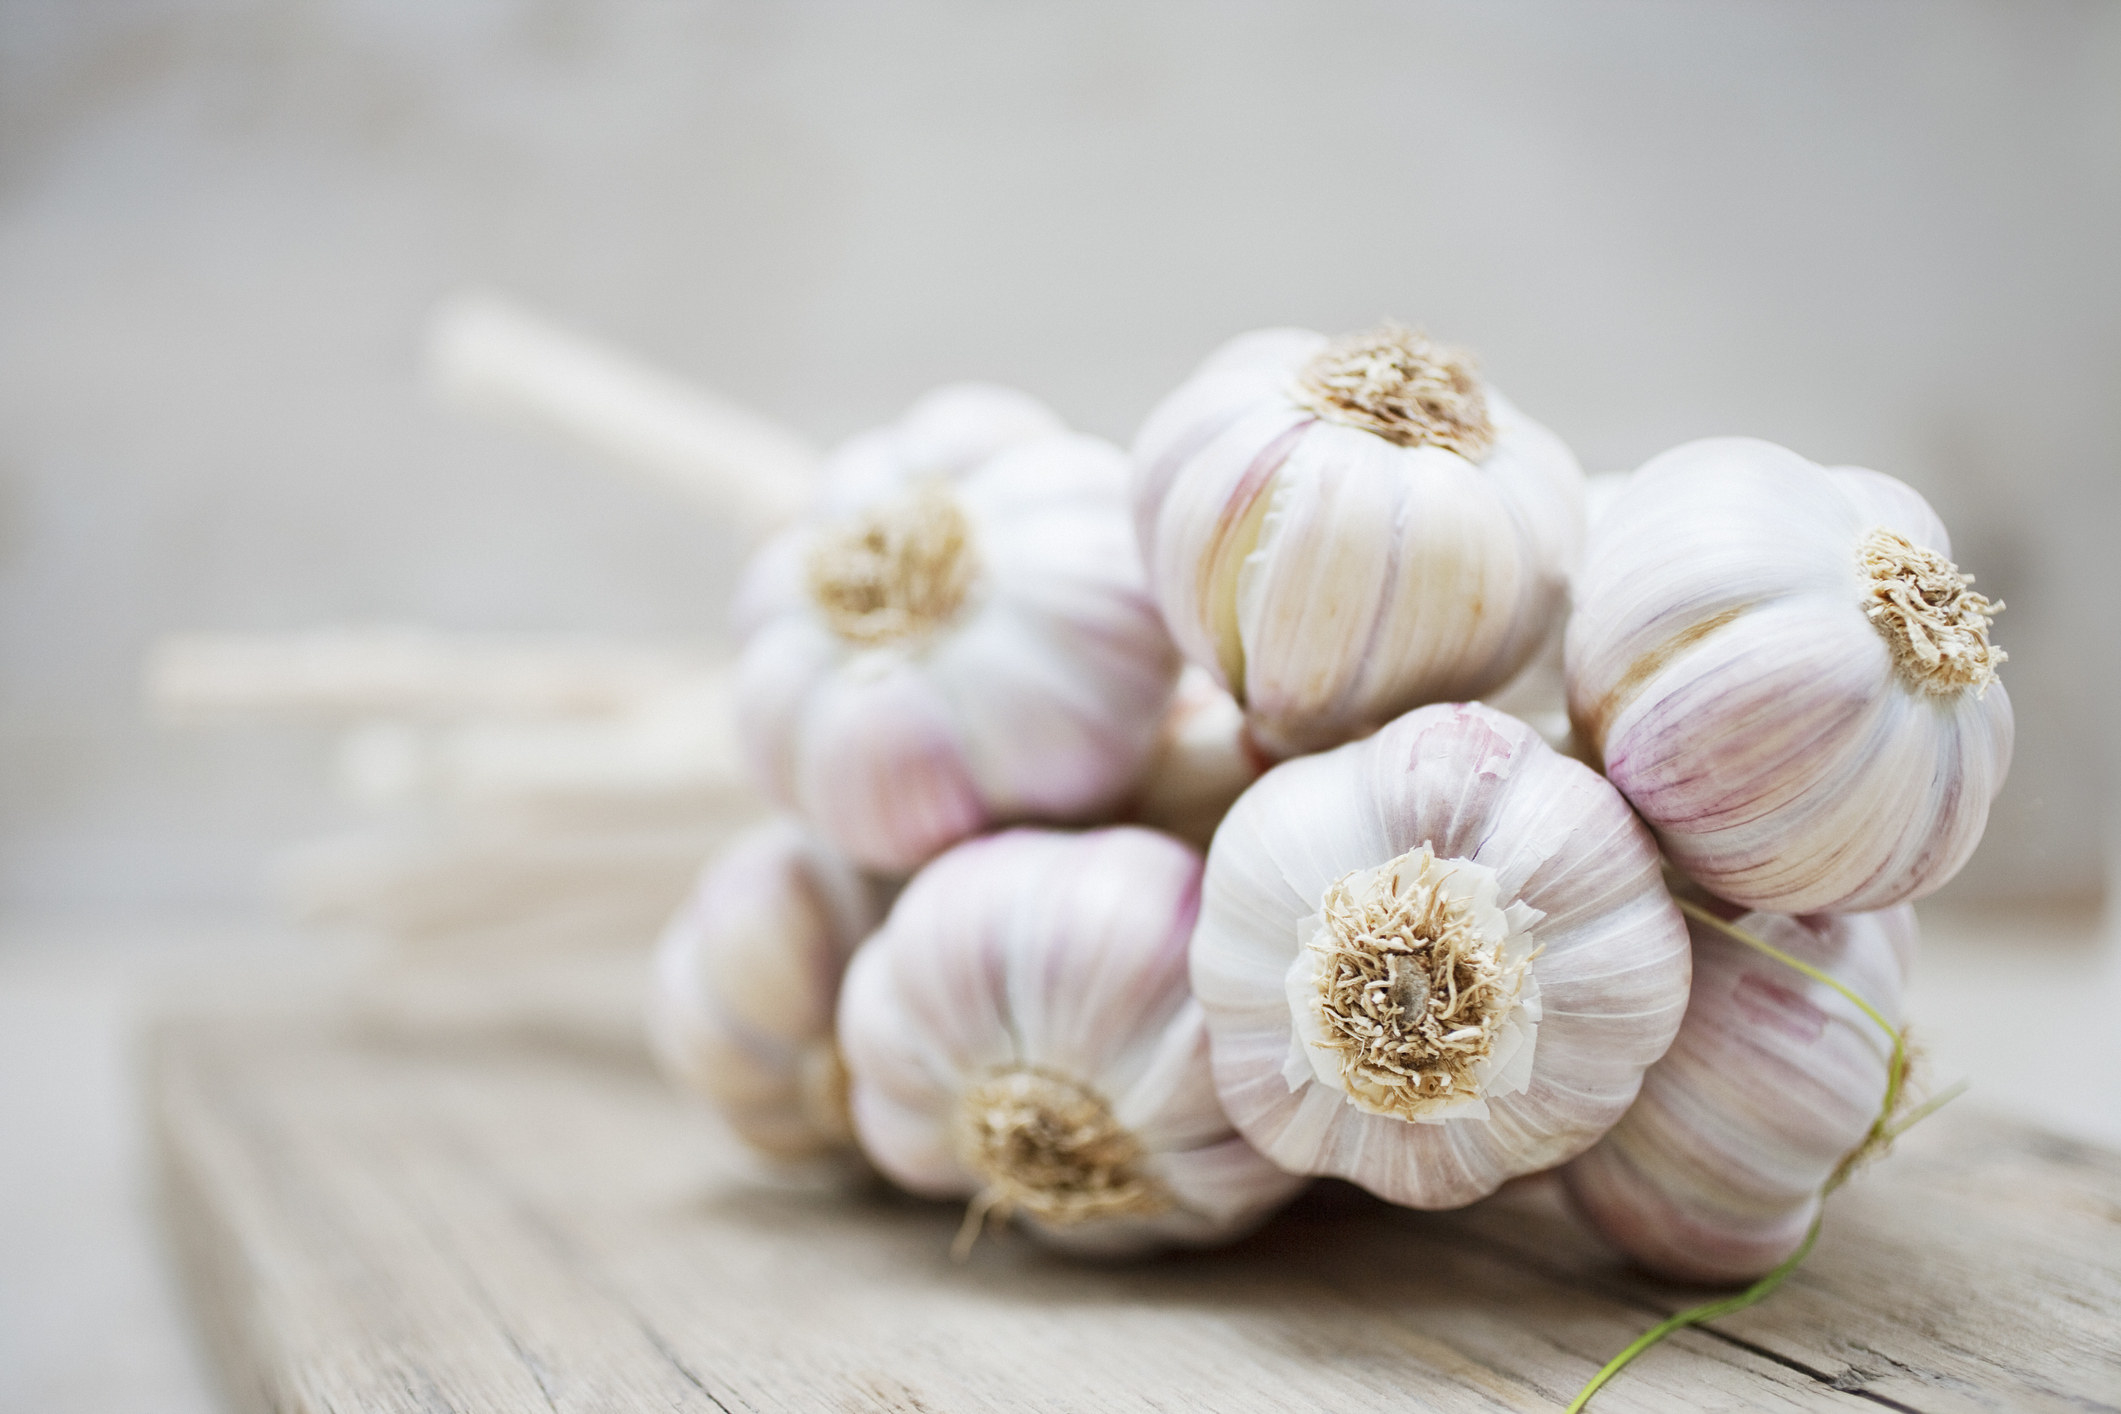 Several bulbs of garlic bundled together on a wooden board